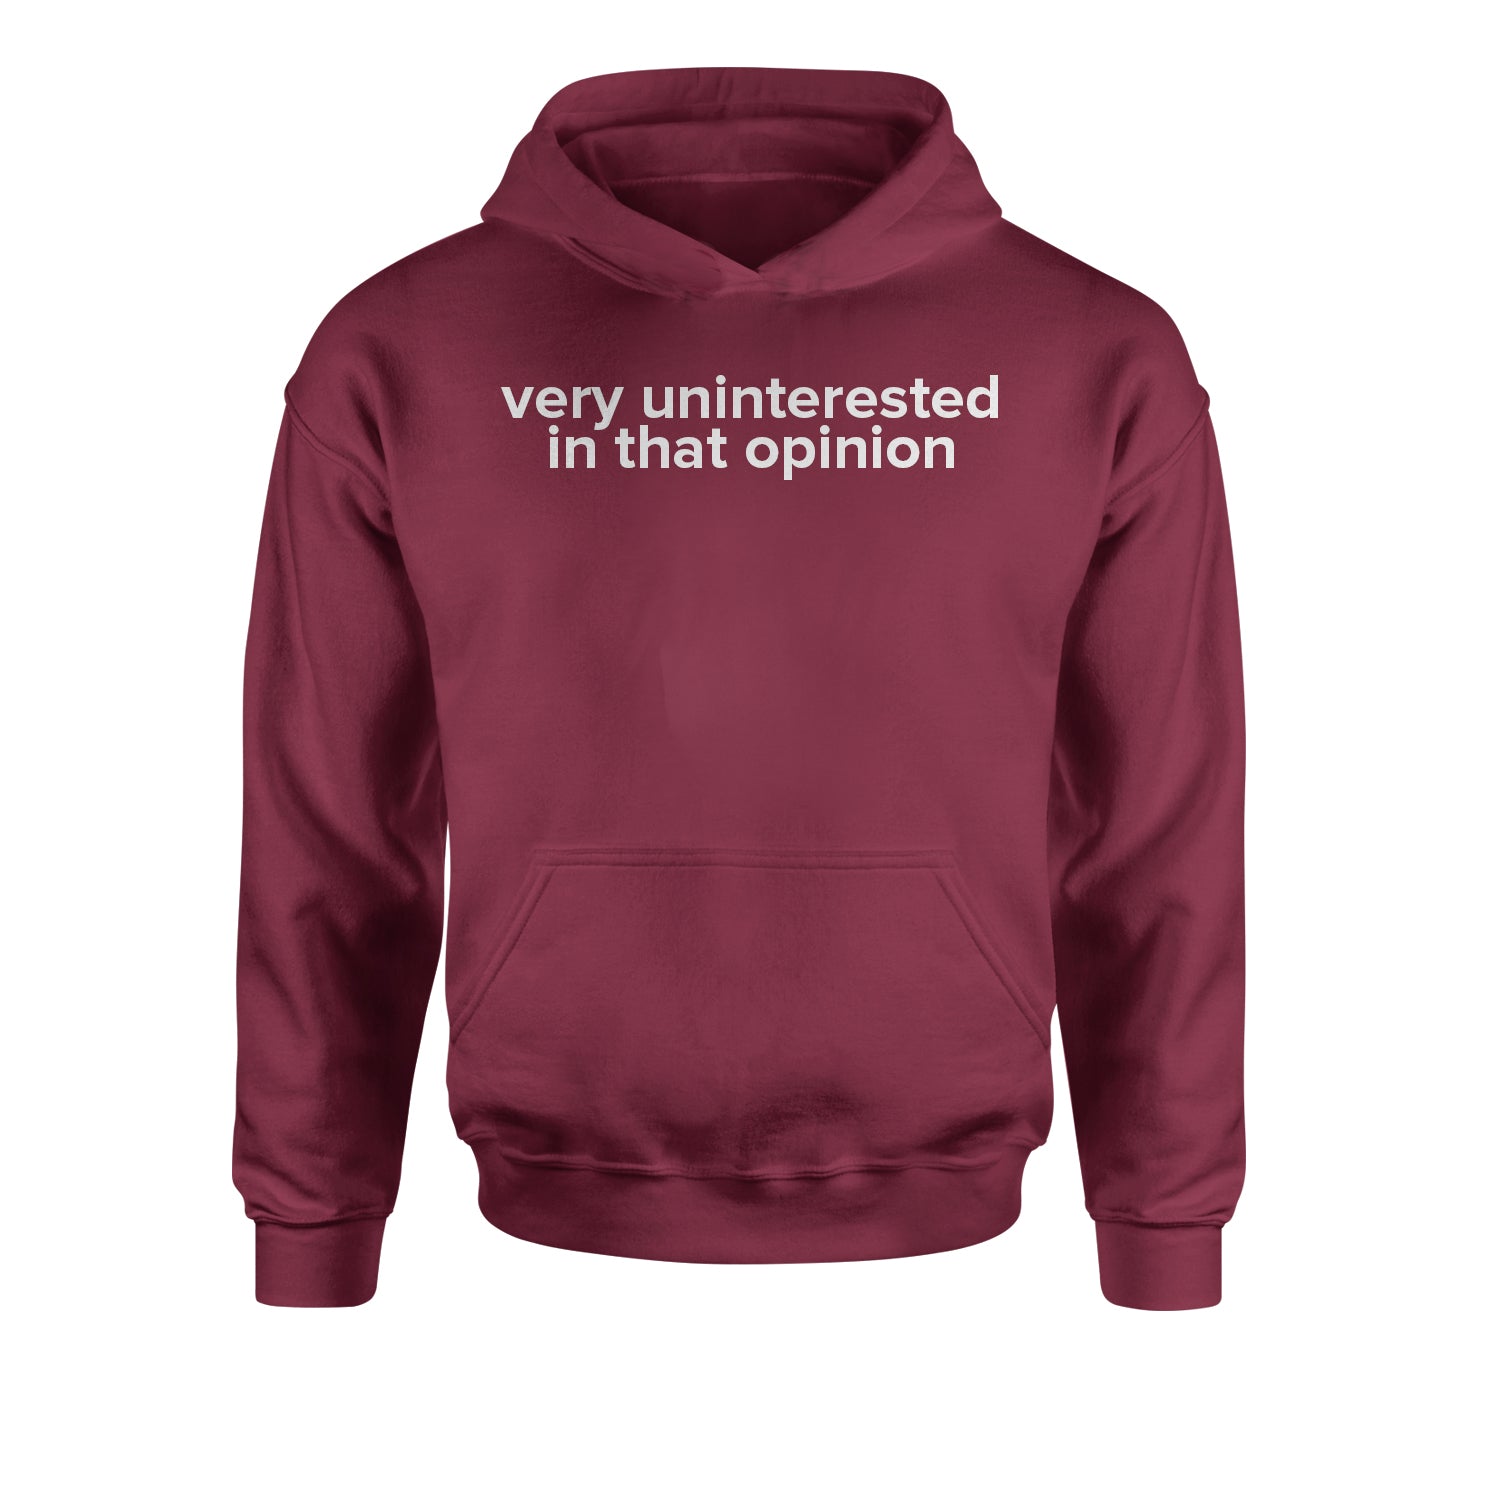 Very Uninterested In That Opinion Youth-Sized Hoodie alexis, creek, d, schitt, schitts by Expression Tees